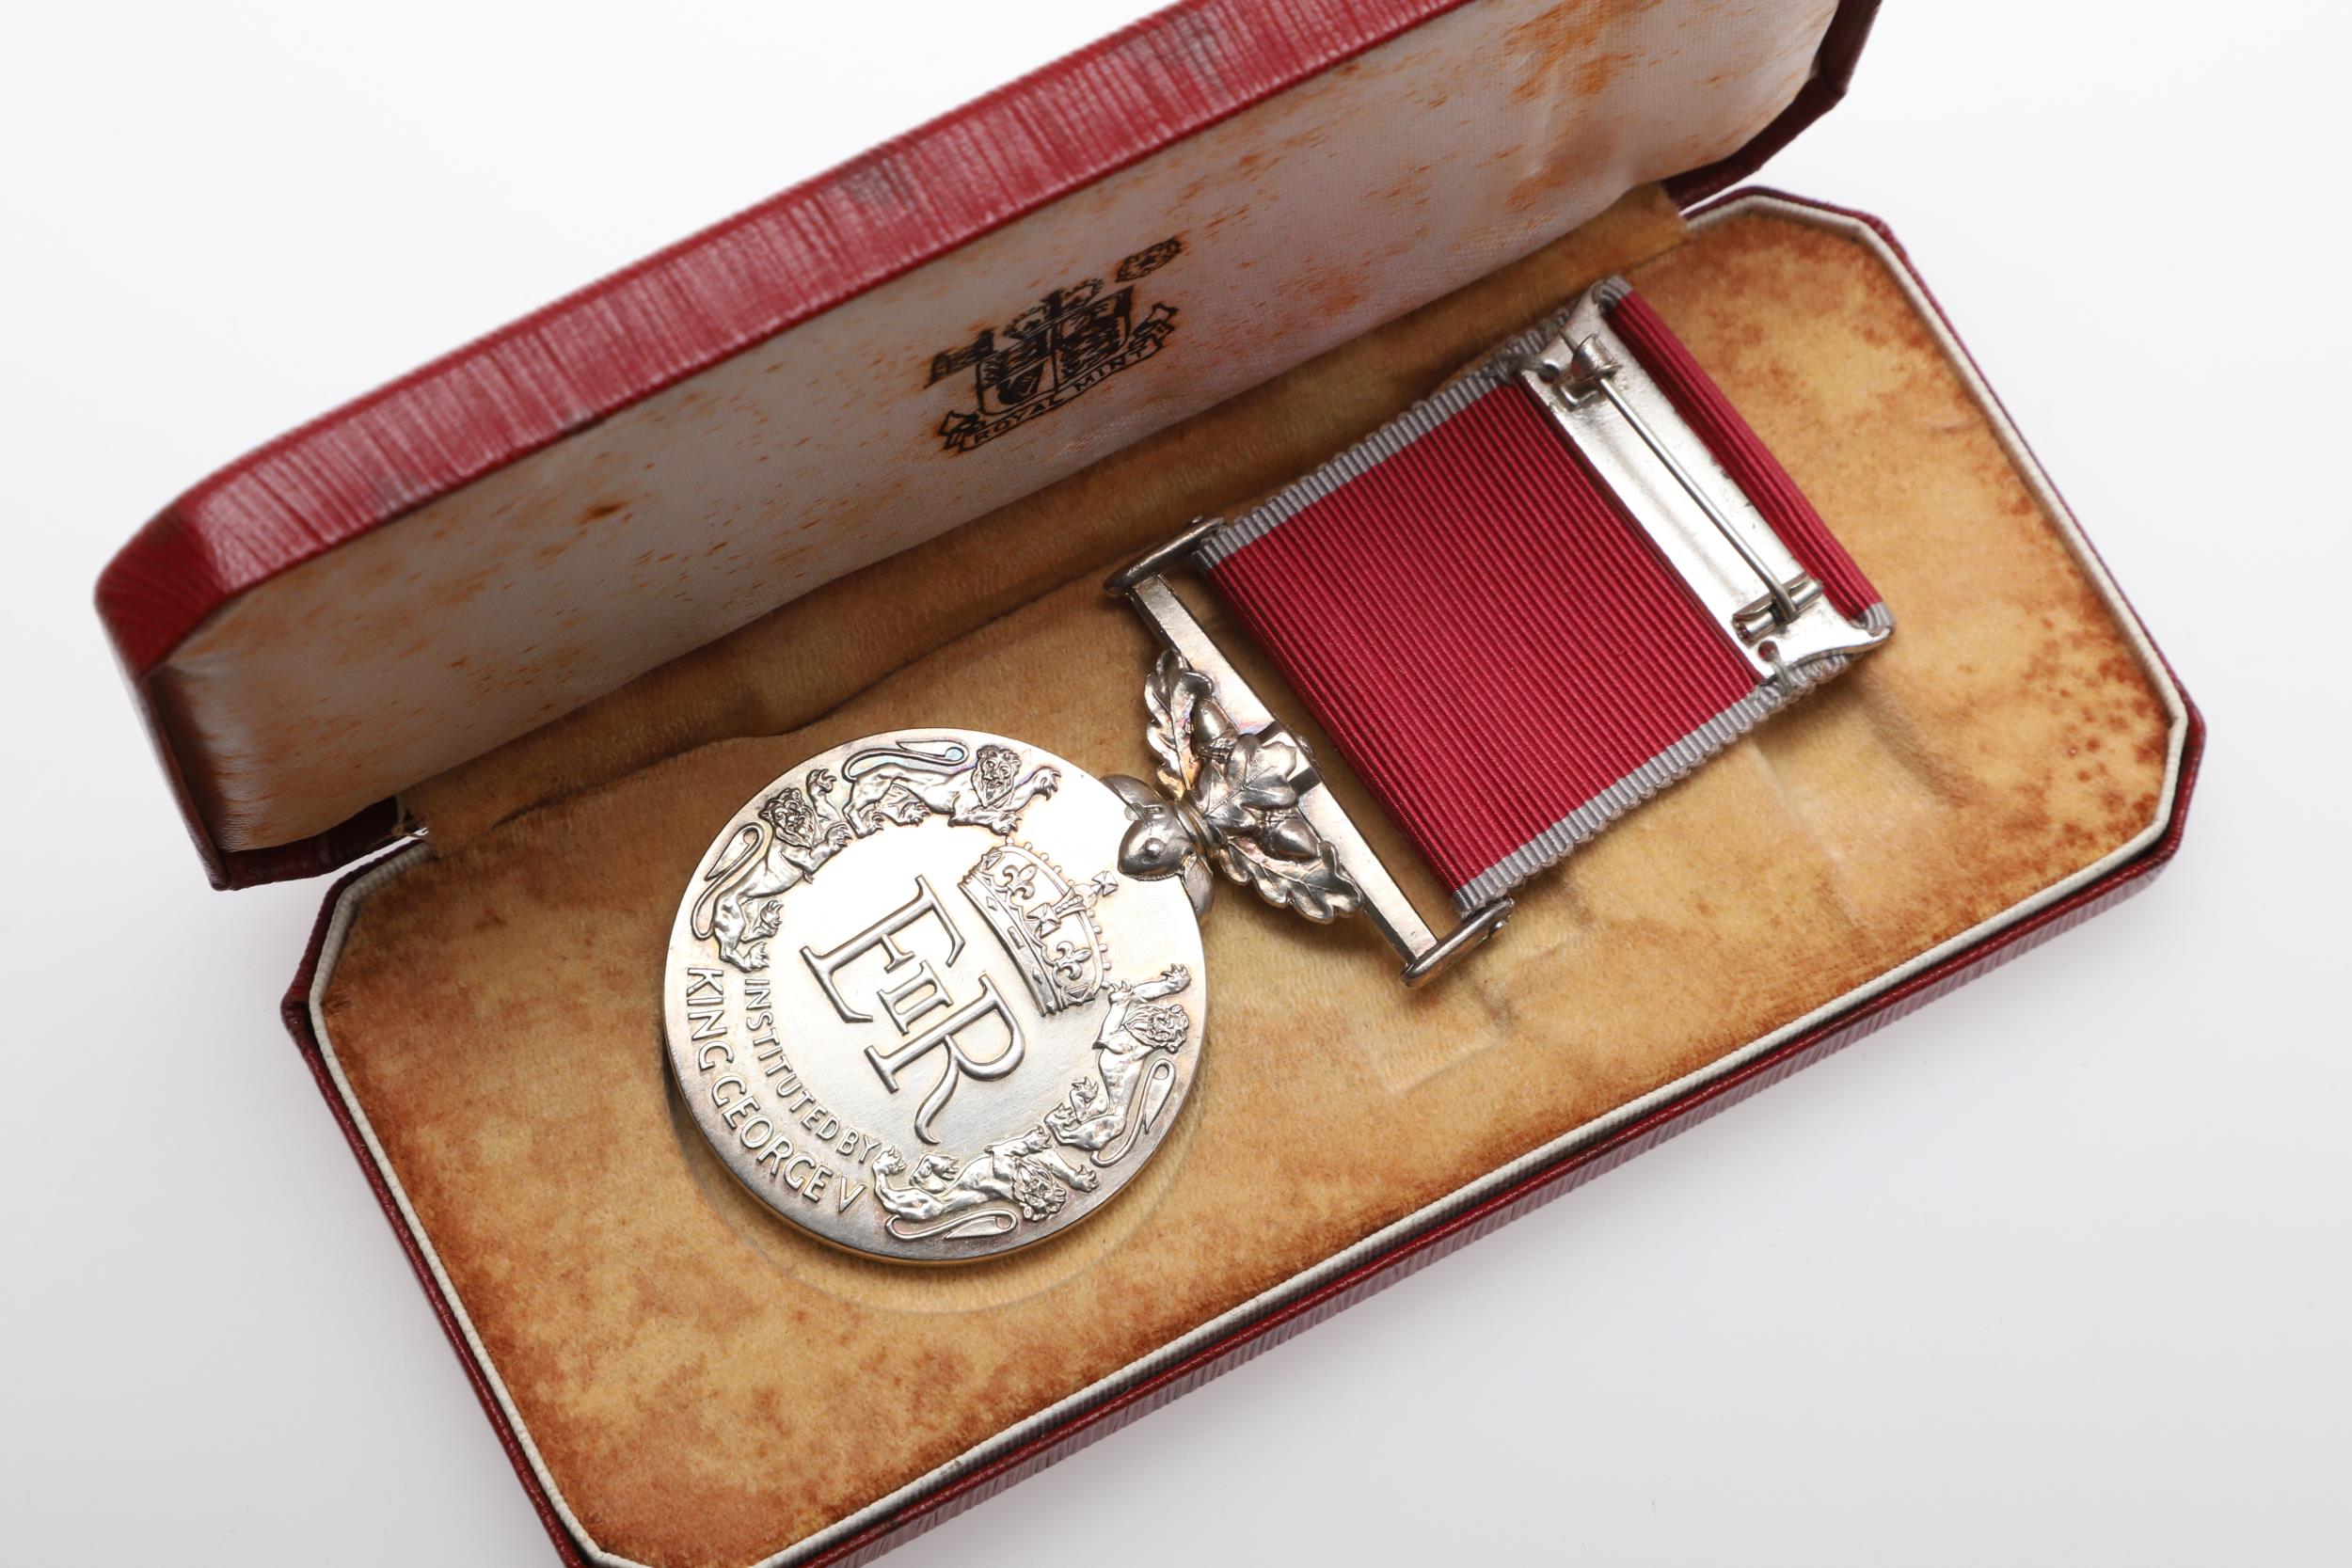 AN ELIZABETH II BRITISH EMPIRE MEDAL TO A YEOVIL MAN. - Image 5 of 7